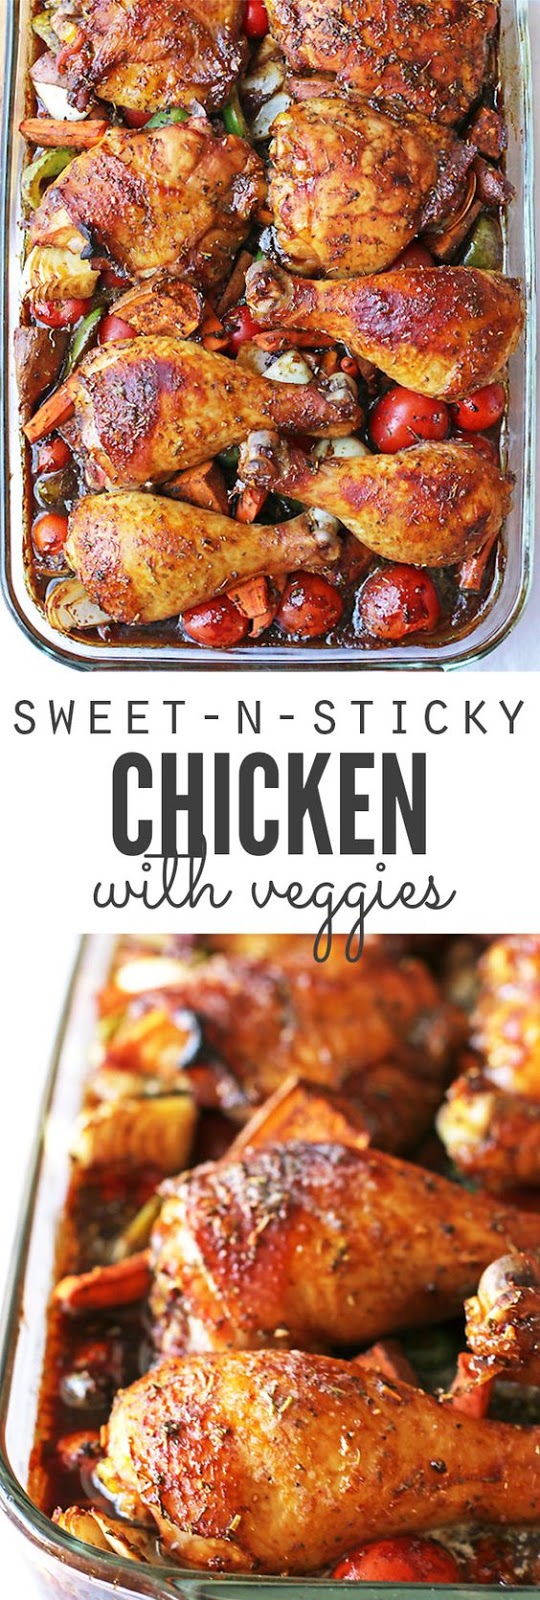 SWEET AND STICKY CHICKEN WITH VEGETABLES #chicken #chickenrecipes #vegetable #vegetablerecipes #dinnerrecipes #dinnerideas #easydinnerrecipes